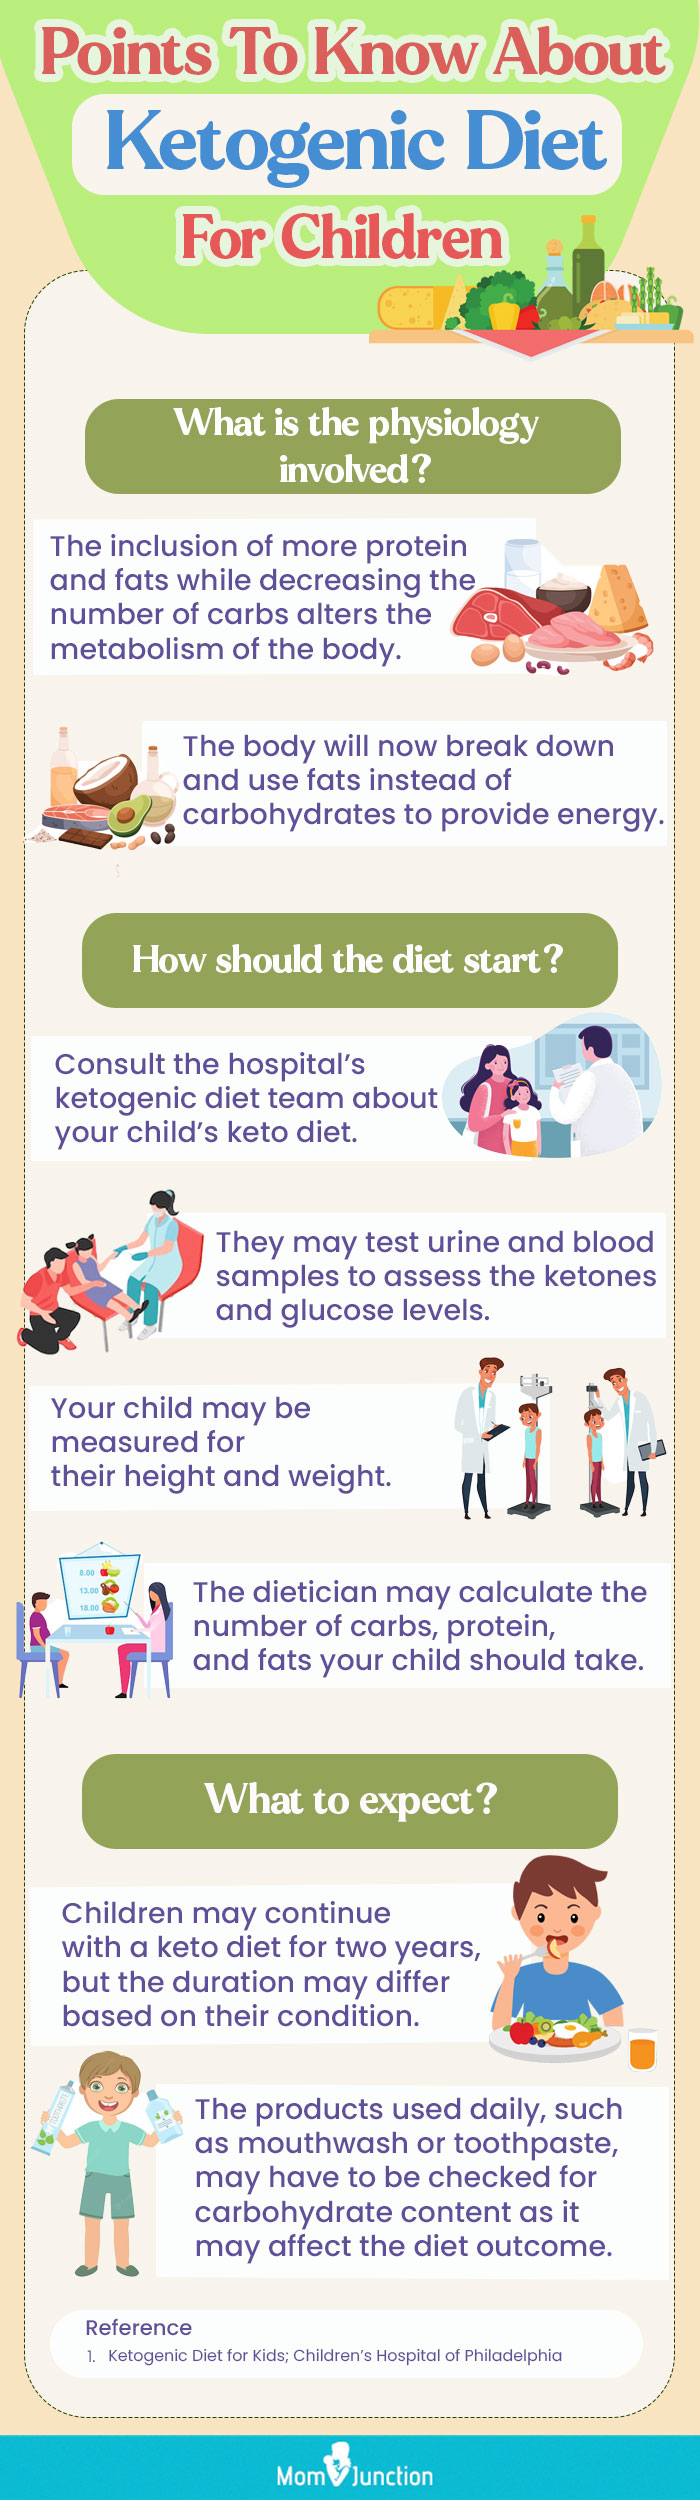 points to know about ketogenic diet for children (infographic)